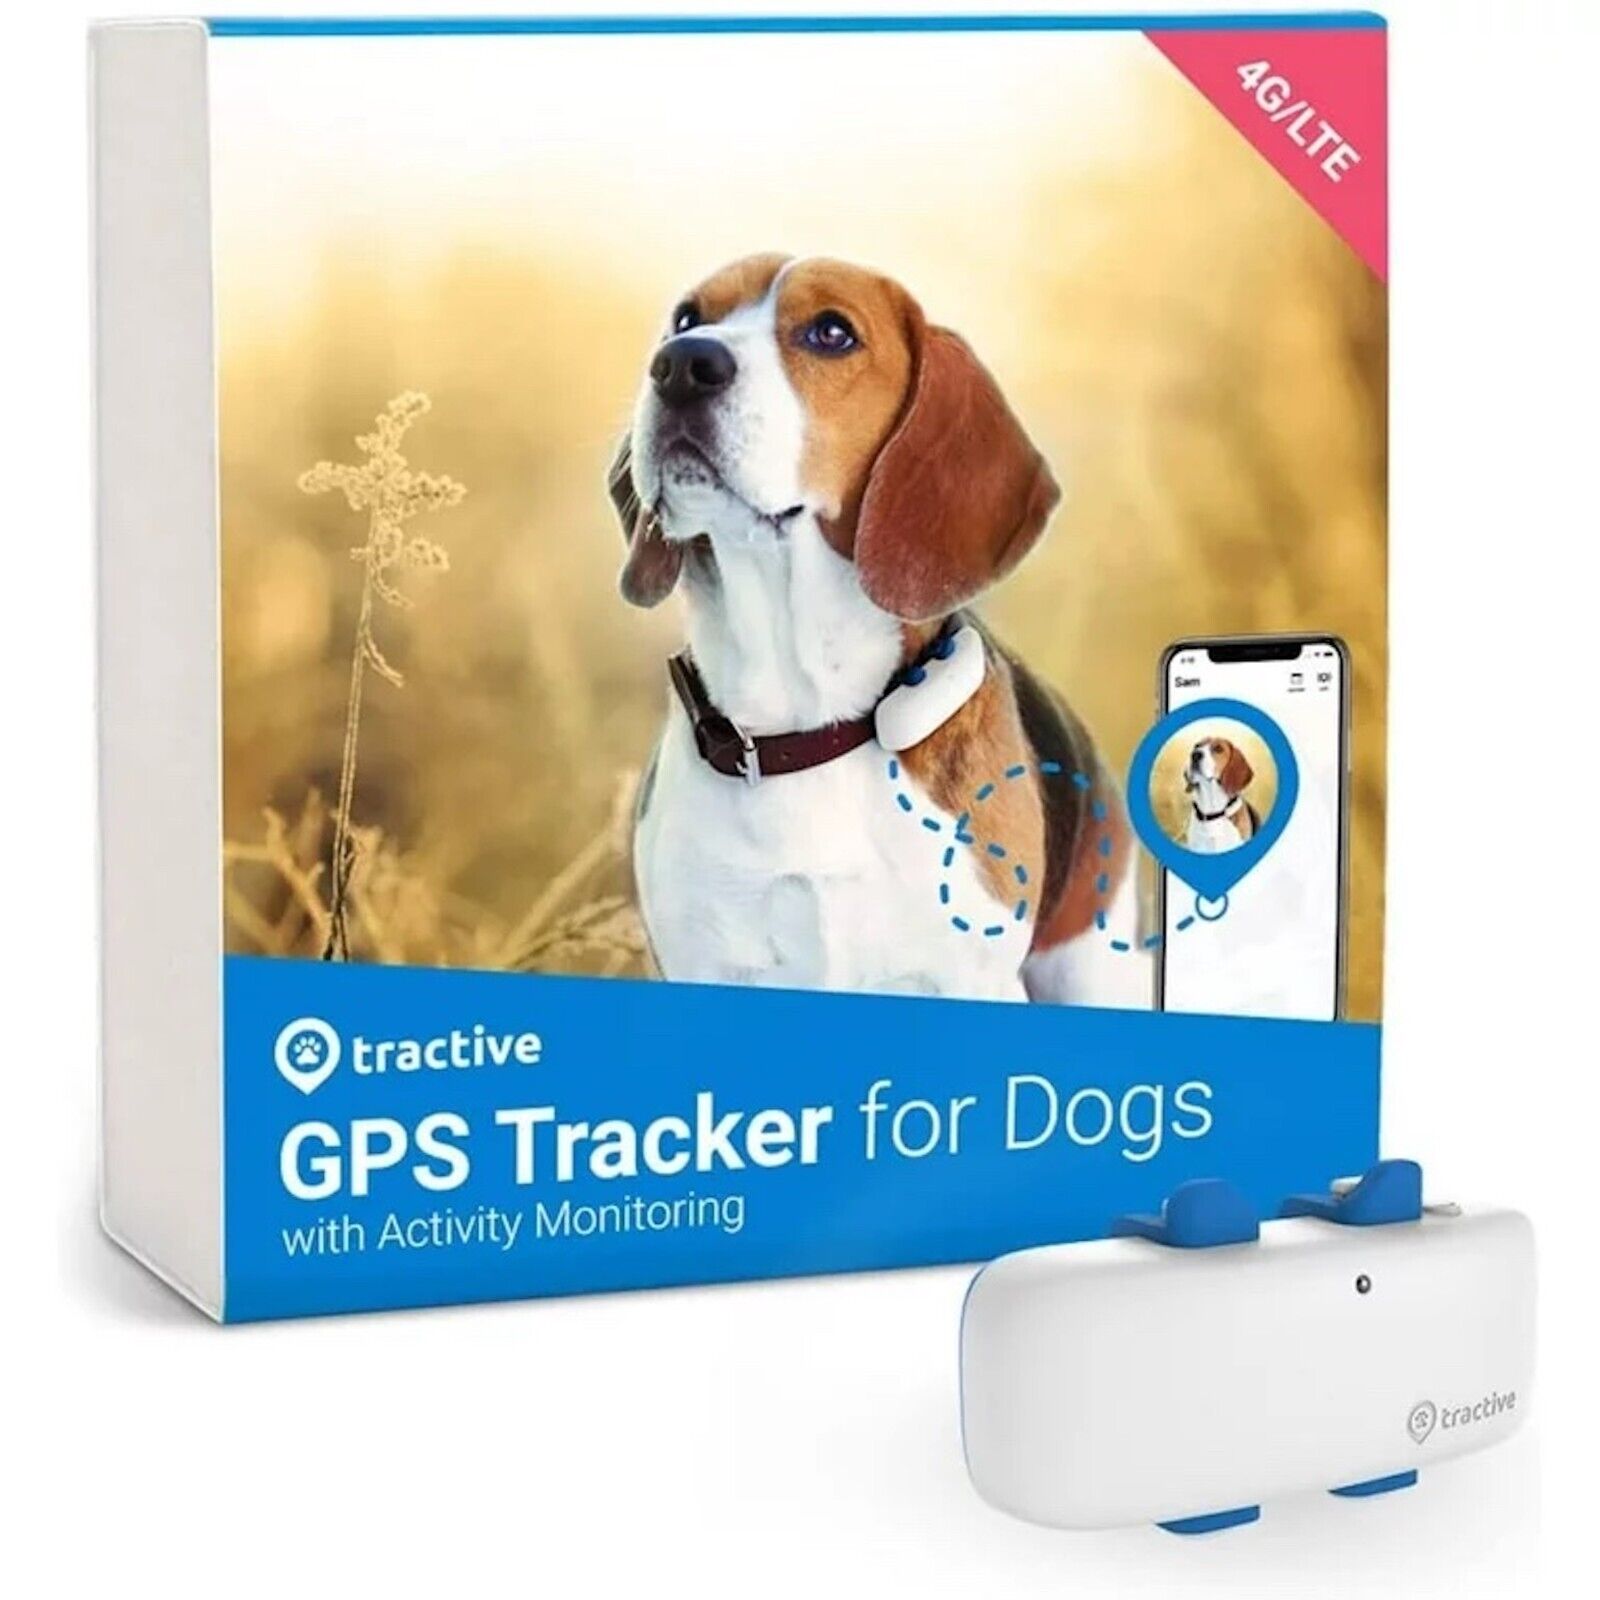 Tractive GPS Tracker & Health Monitoring for Dogs, White, Refurbished